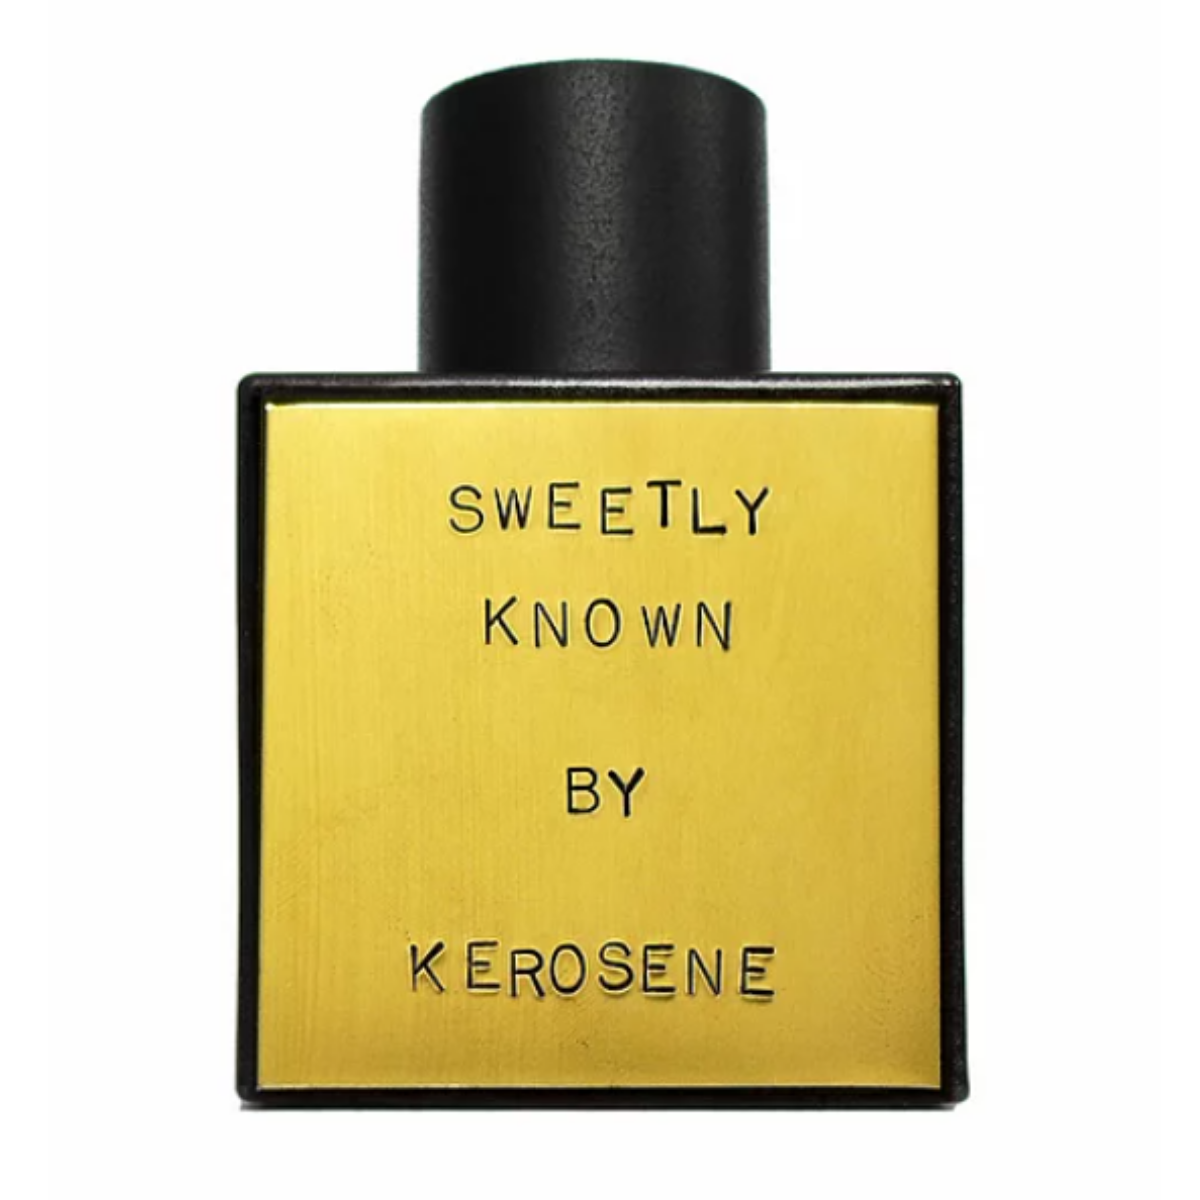 Primary image of Sweetly Known Eau De Parfum